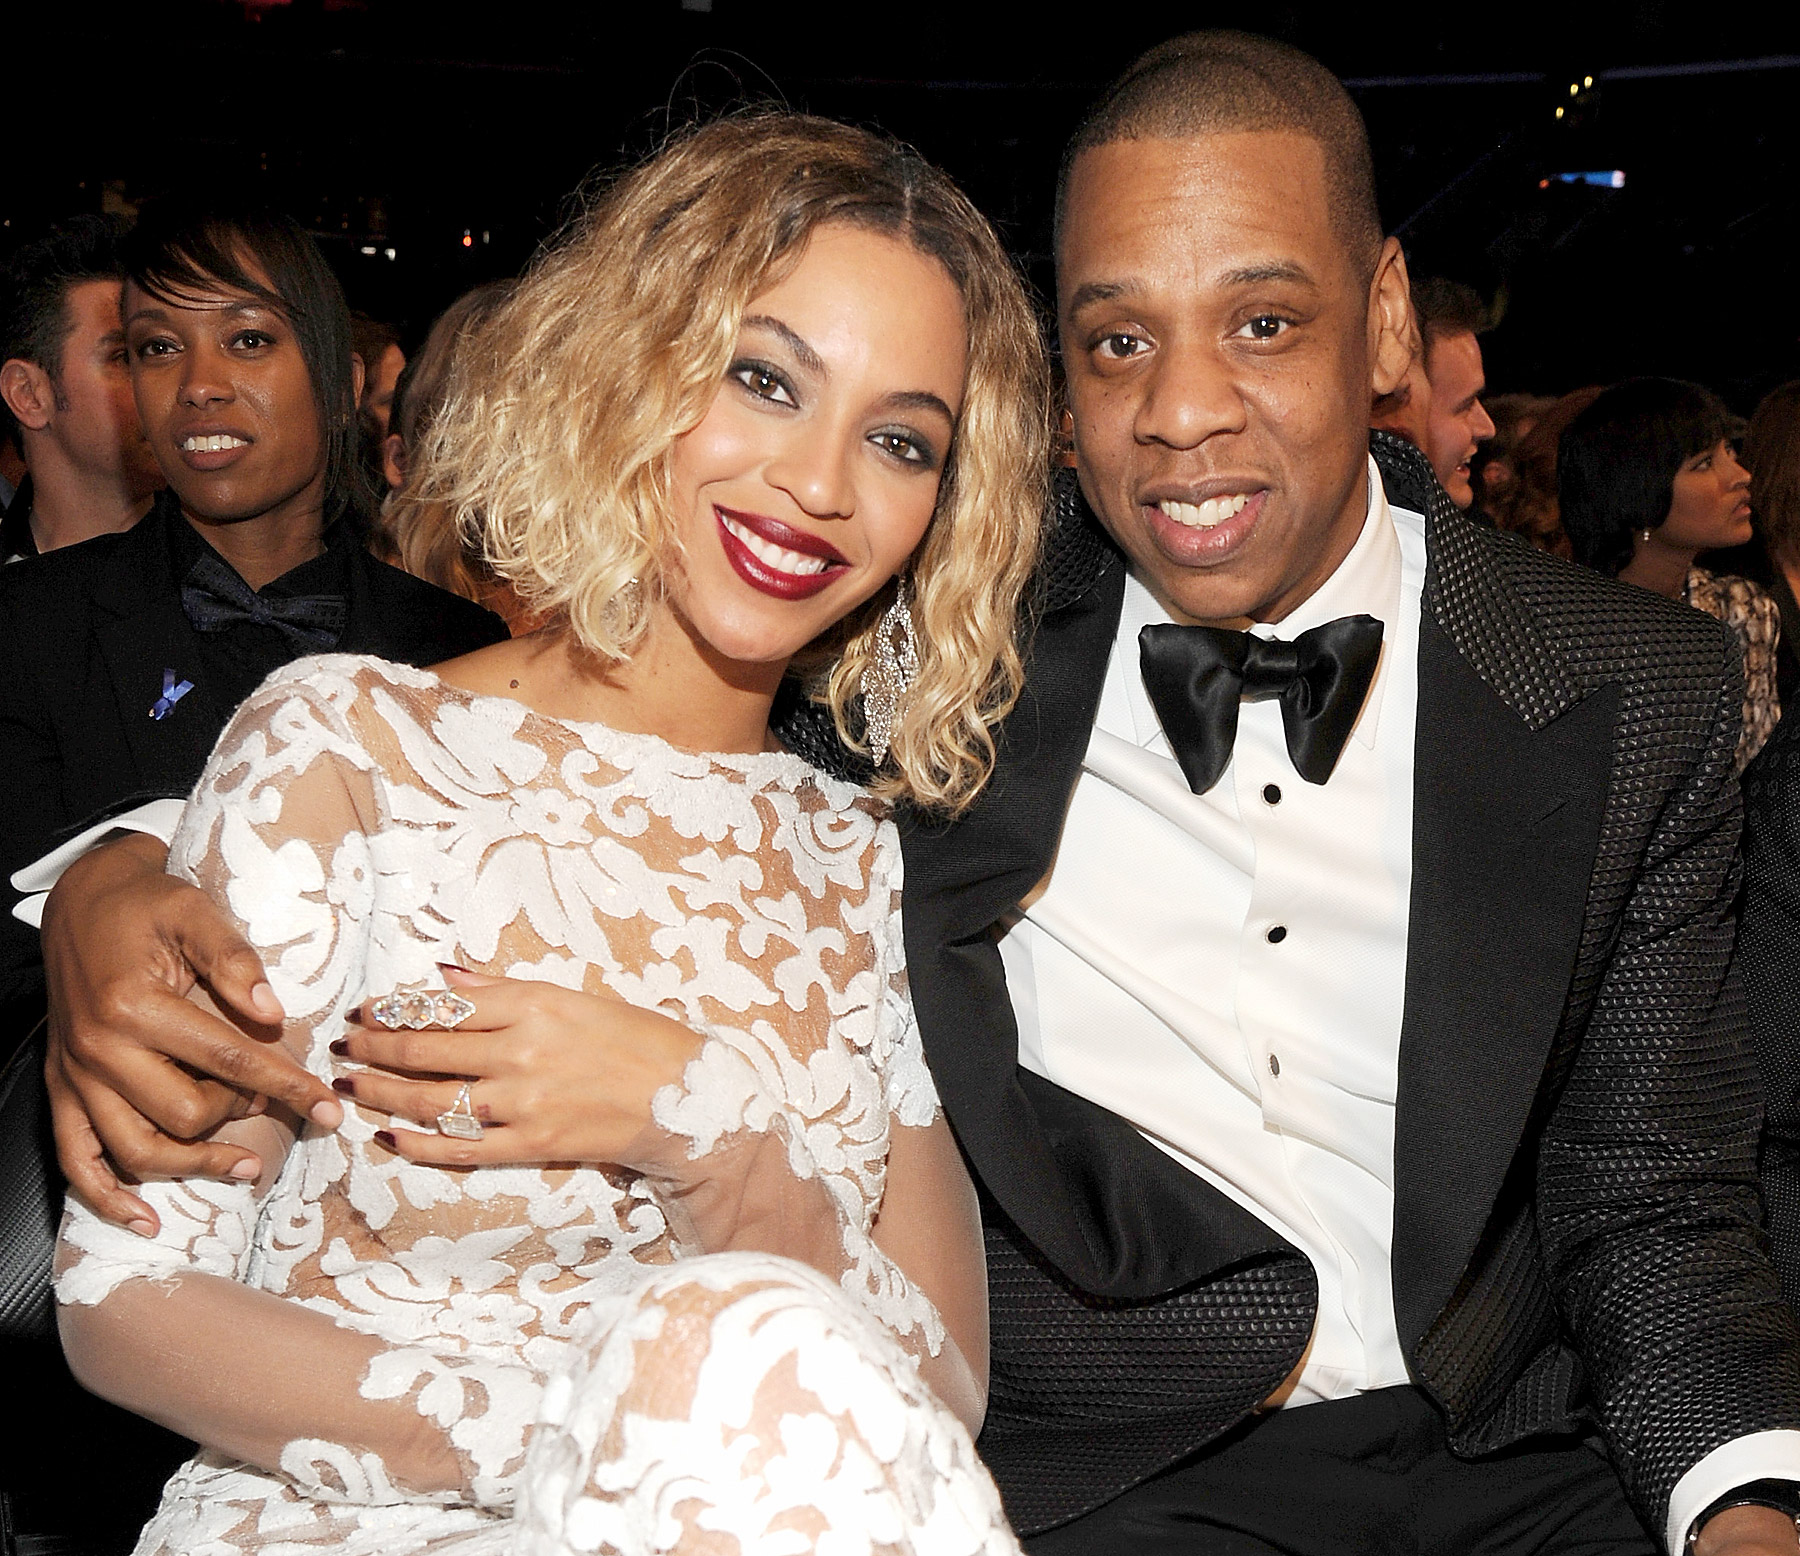 Jay Z and Beyoncé wedding video released on social media.